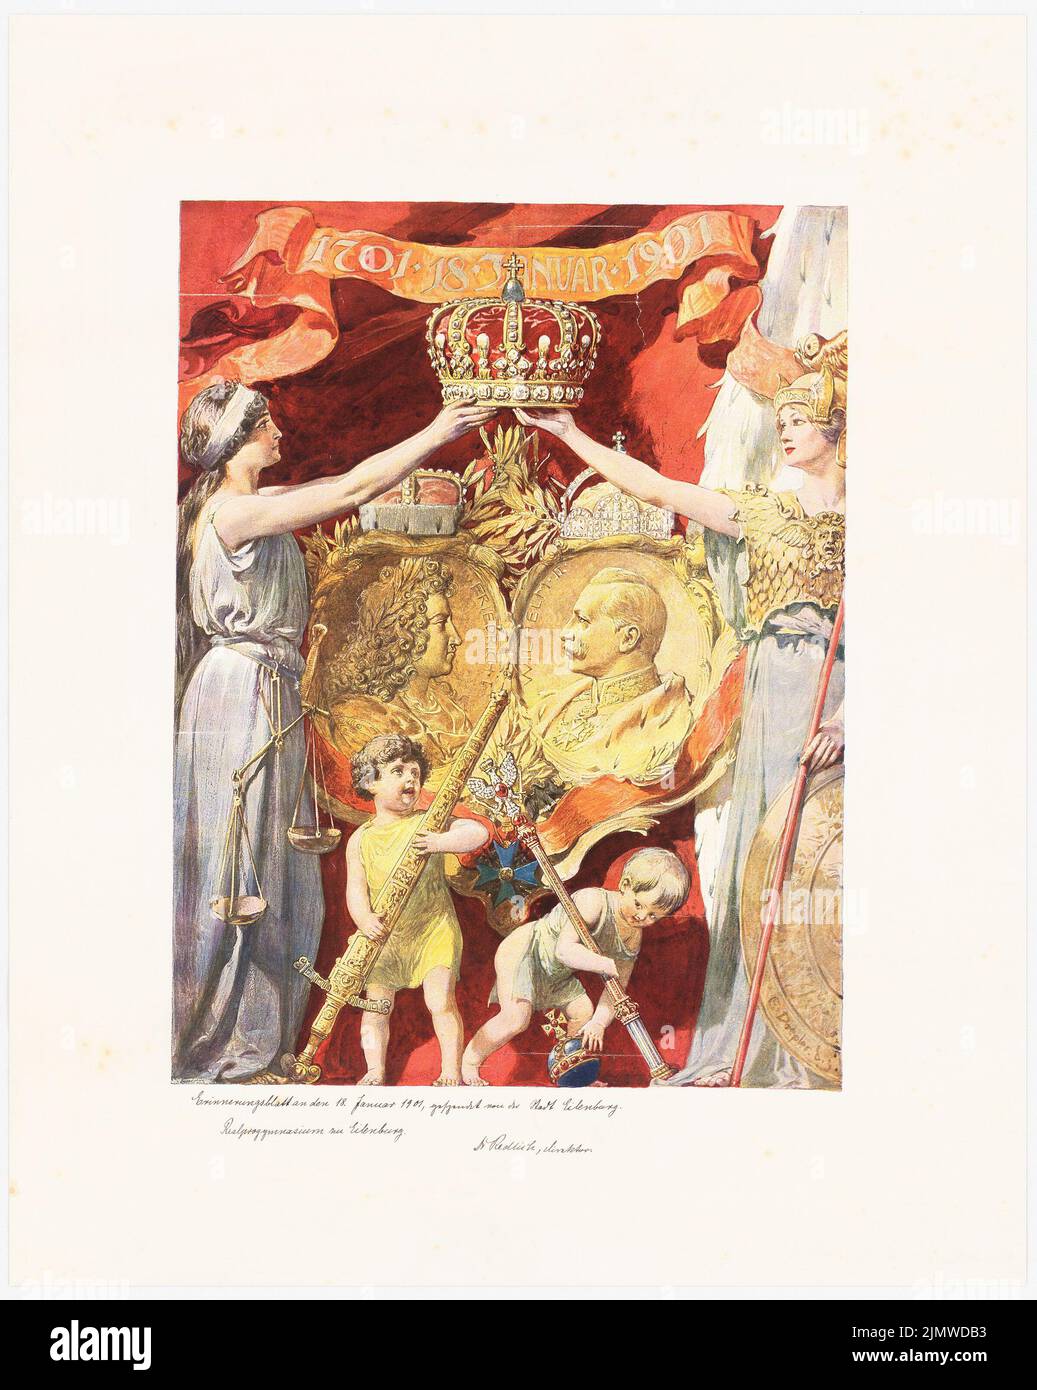 Doepler E., memory sheet of January 18, 1901 (01/18/1901): Friedrich I. and Wilhelm II in the side view facing each other in gold (?) Medallions, right (Athene with shield) and left (Justizia with Libra). Ink over pressure colored on the box, 60.6 x 48.3 cm (including scan edges) Doepler E. : Erinnerungsblatt an den 18. Januar 1901 Stock Photo